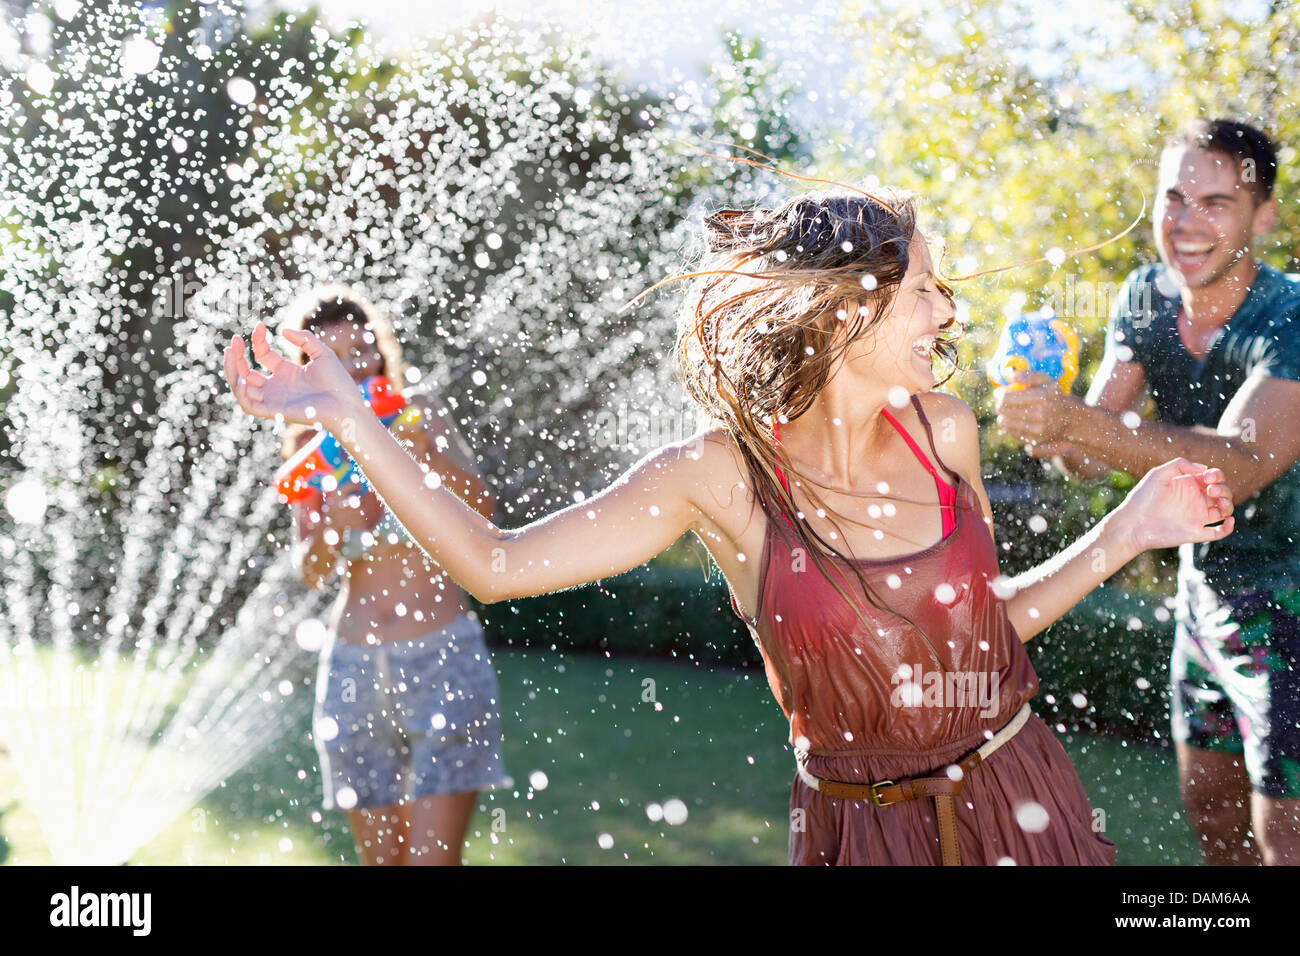 Friends playing with water guns in sprinkler Stock Photo